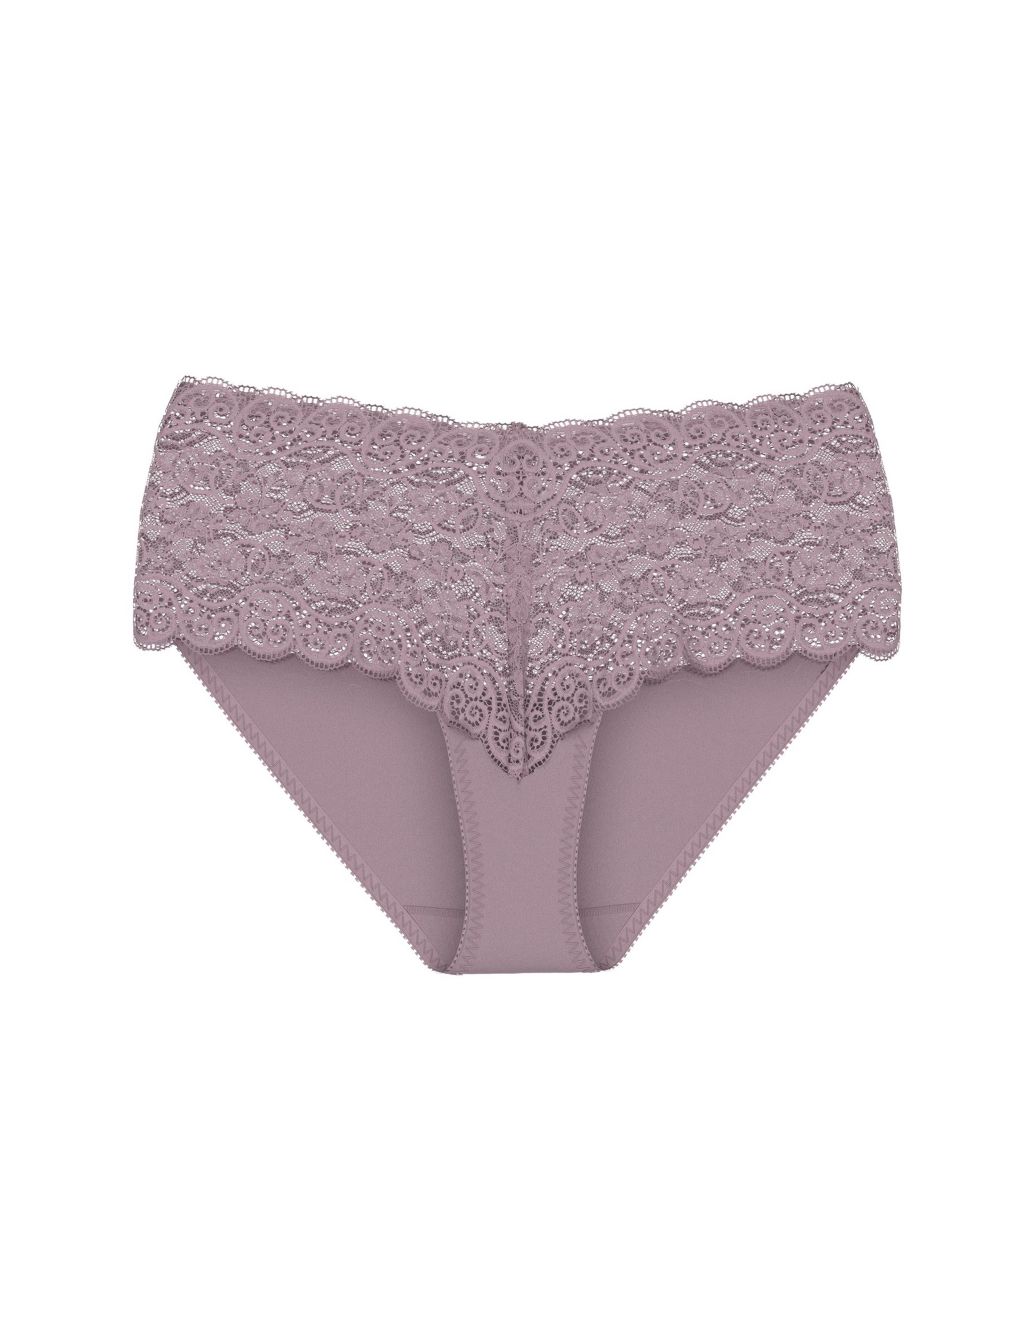 Amourette 300 All Over Lace Full Briefs